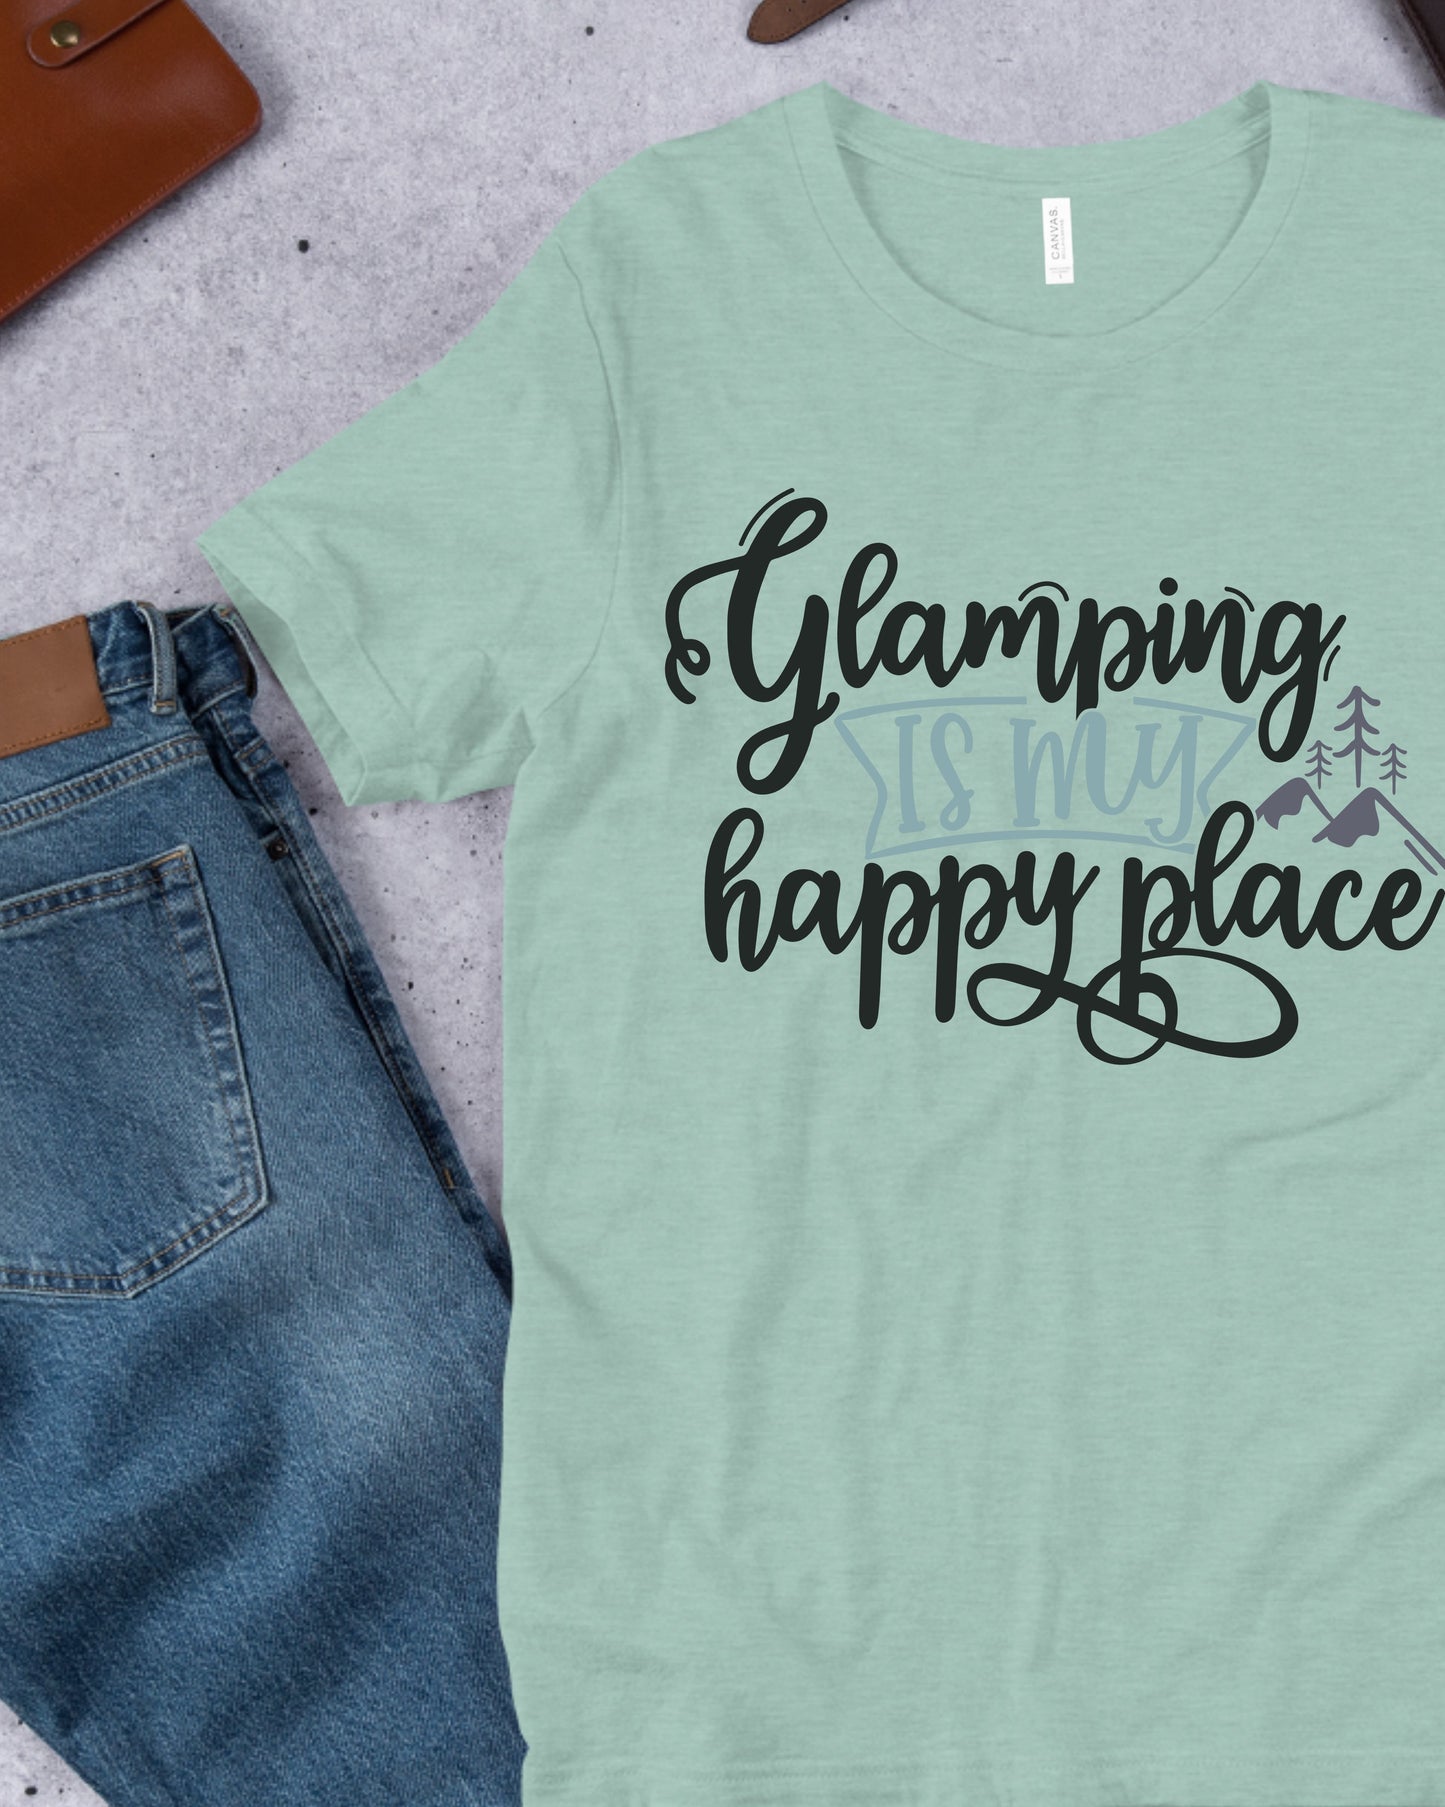 "Glamping is my happy place" Tee